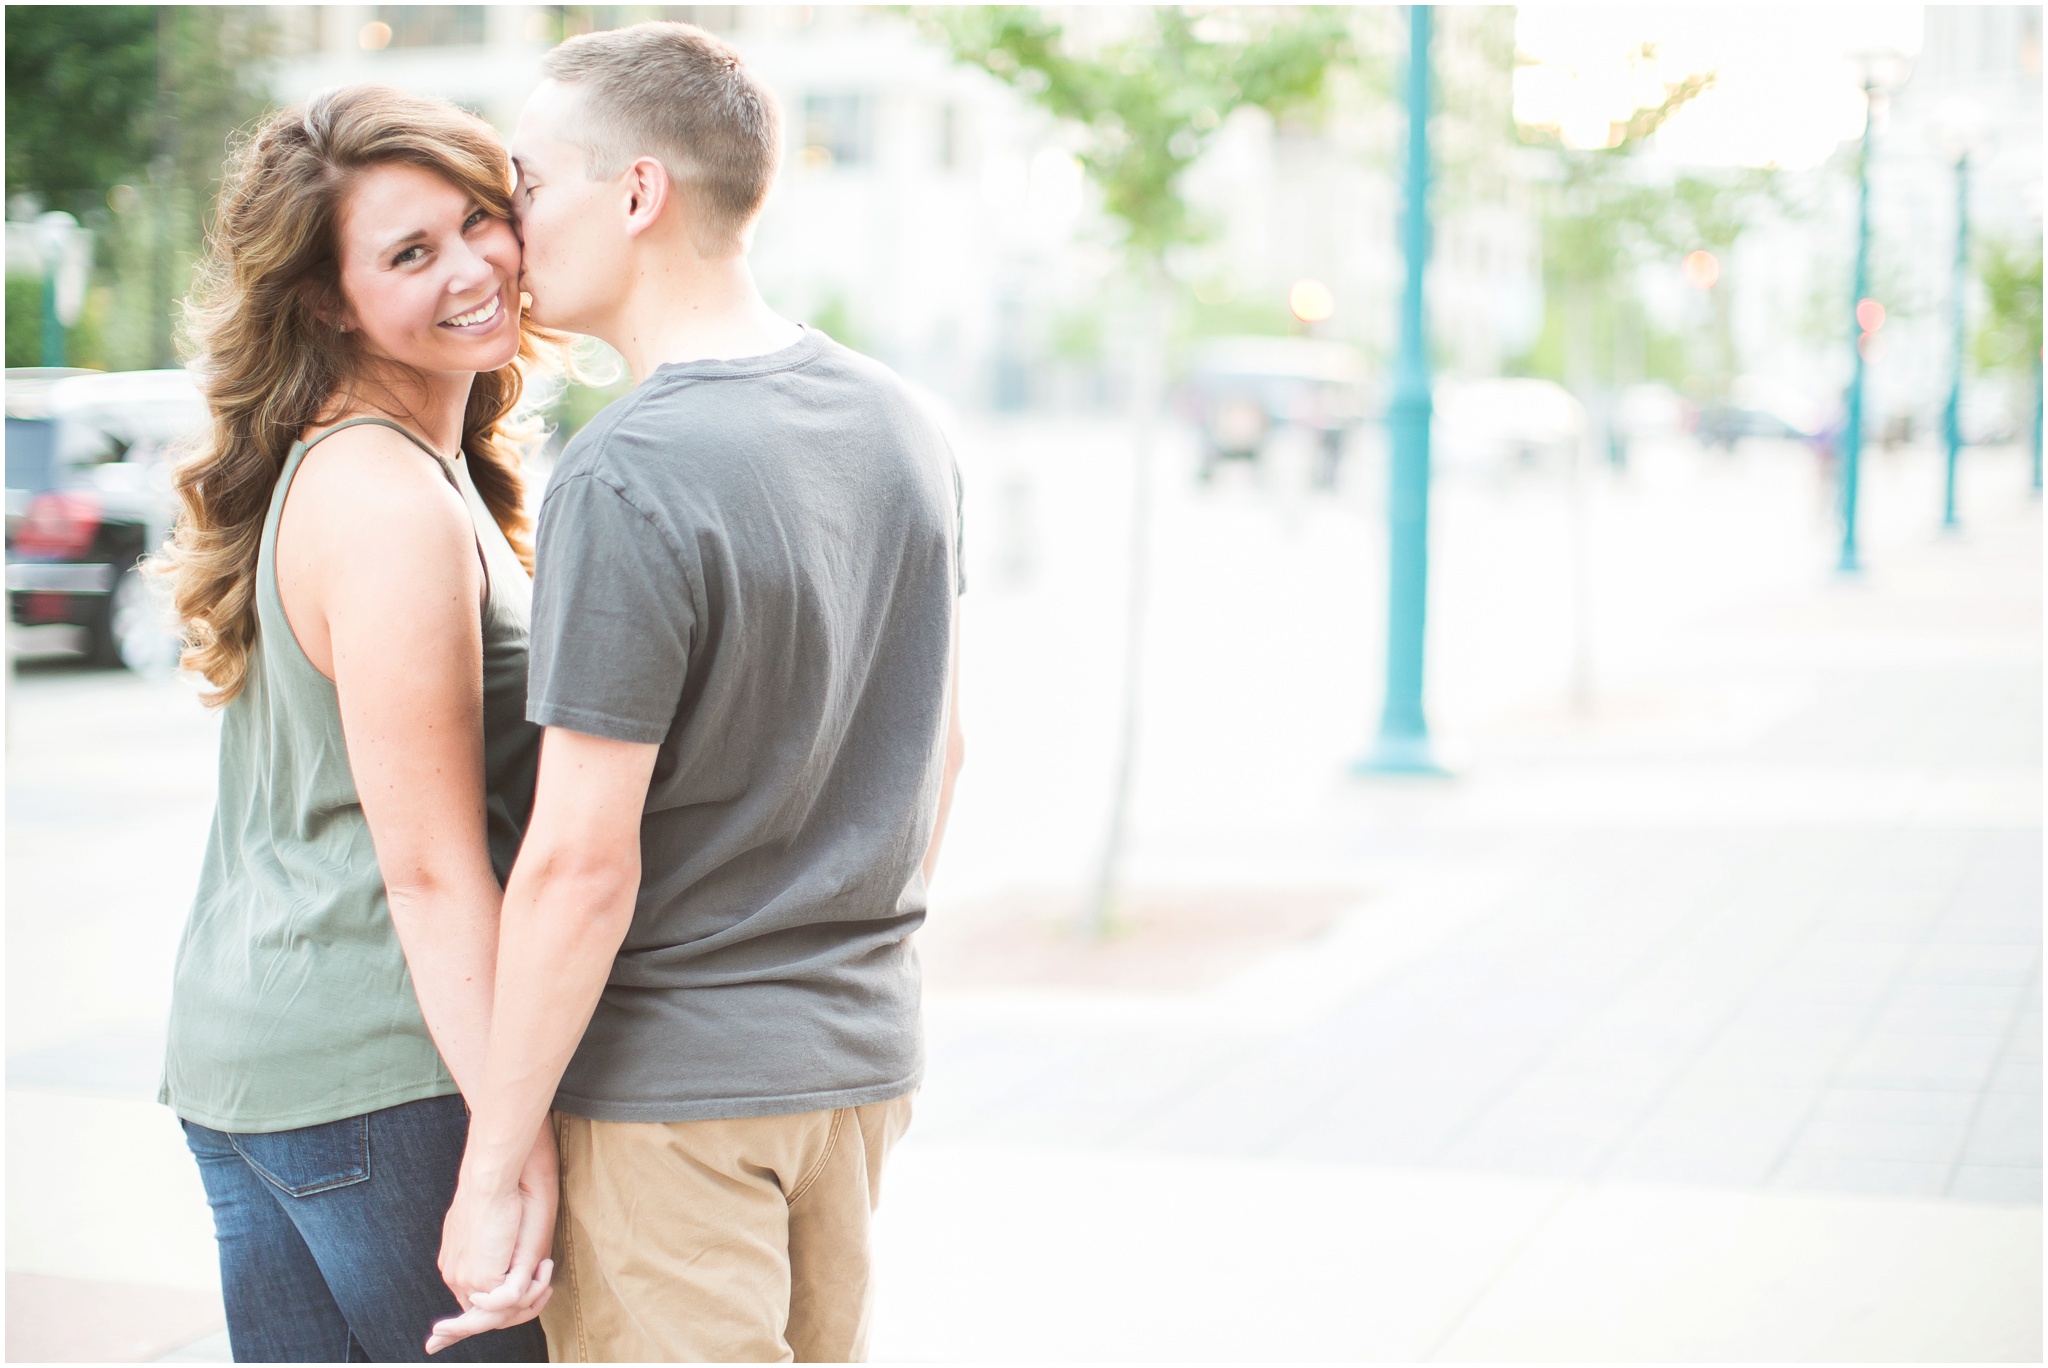 Downtown_Madison_Wisconsin_Engagement_Session_Waterfront_Monona_Terrace_0490.jpg